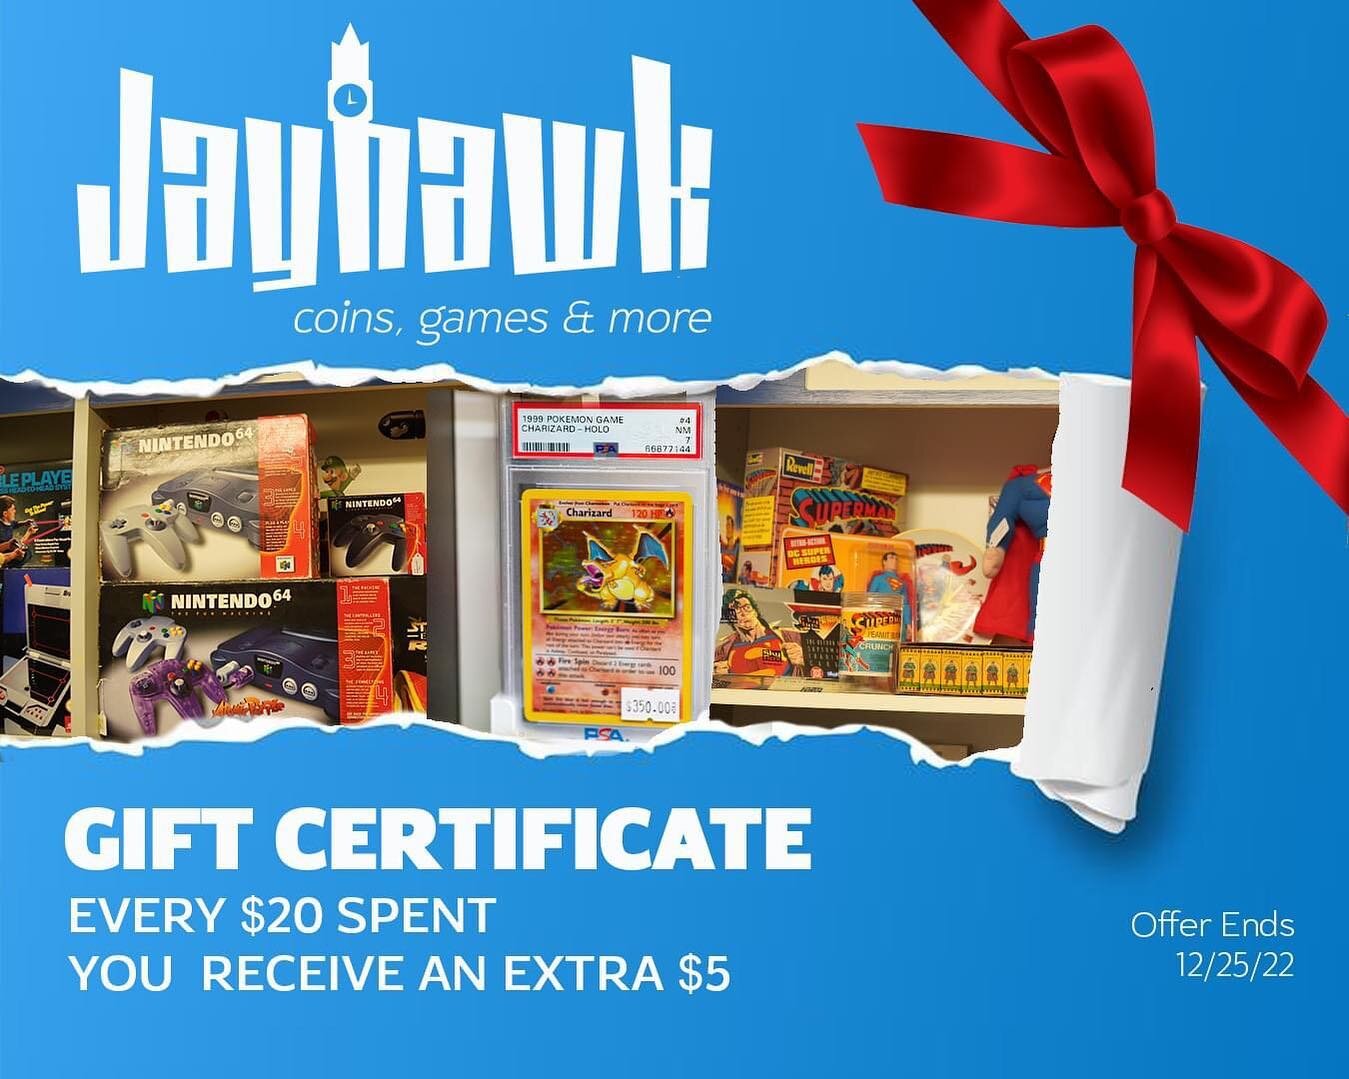 @jayhawkcoinsgamesandmore is having a gift certificate promo. For every $20 spent you get an extra $5. Promotion will last until Christmas.

#monday #giftcertificate #videogames #cards #tradingcards #actionfigures #funko #funkopop #pops #sportsmemora